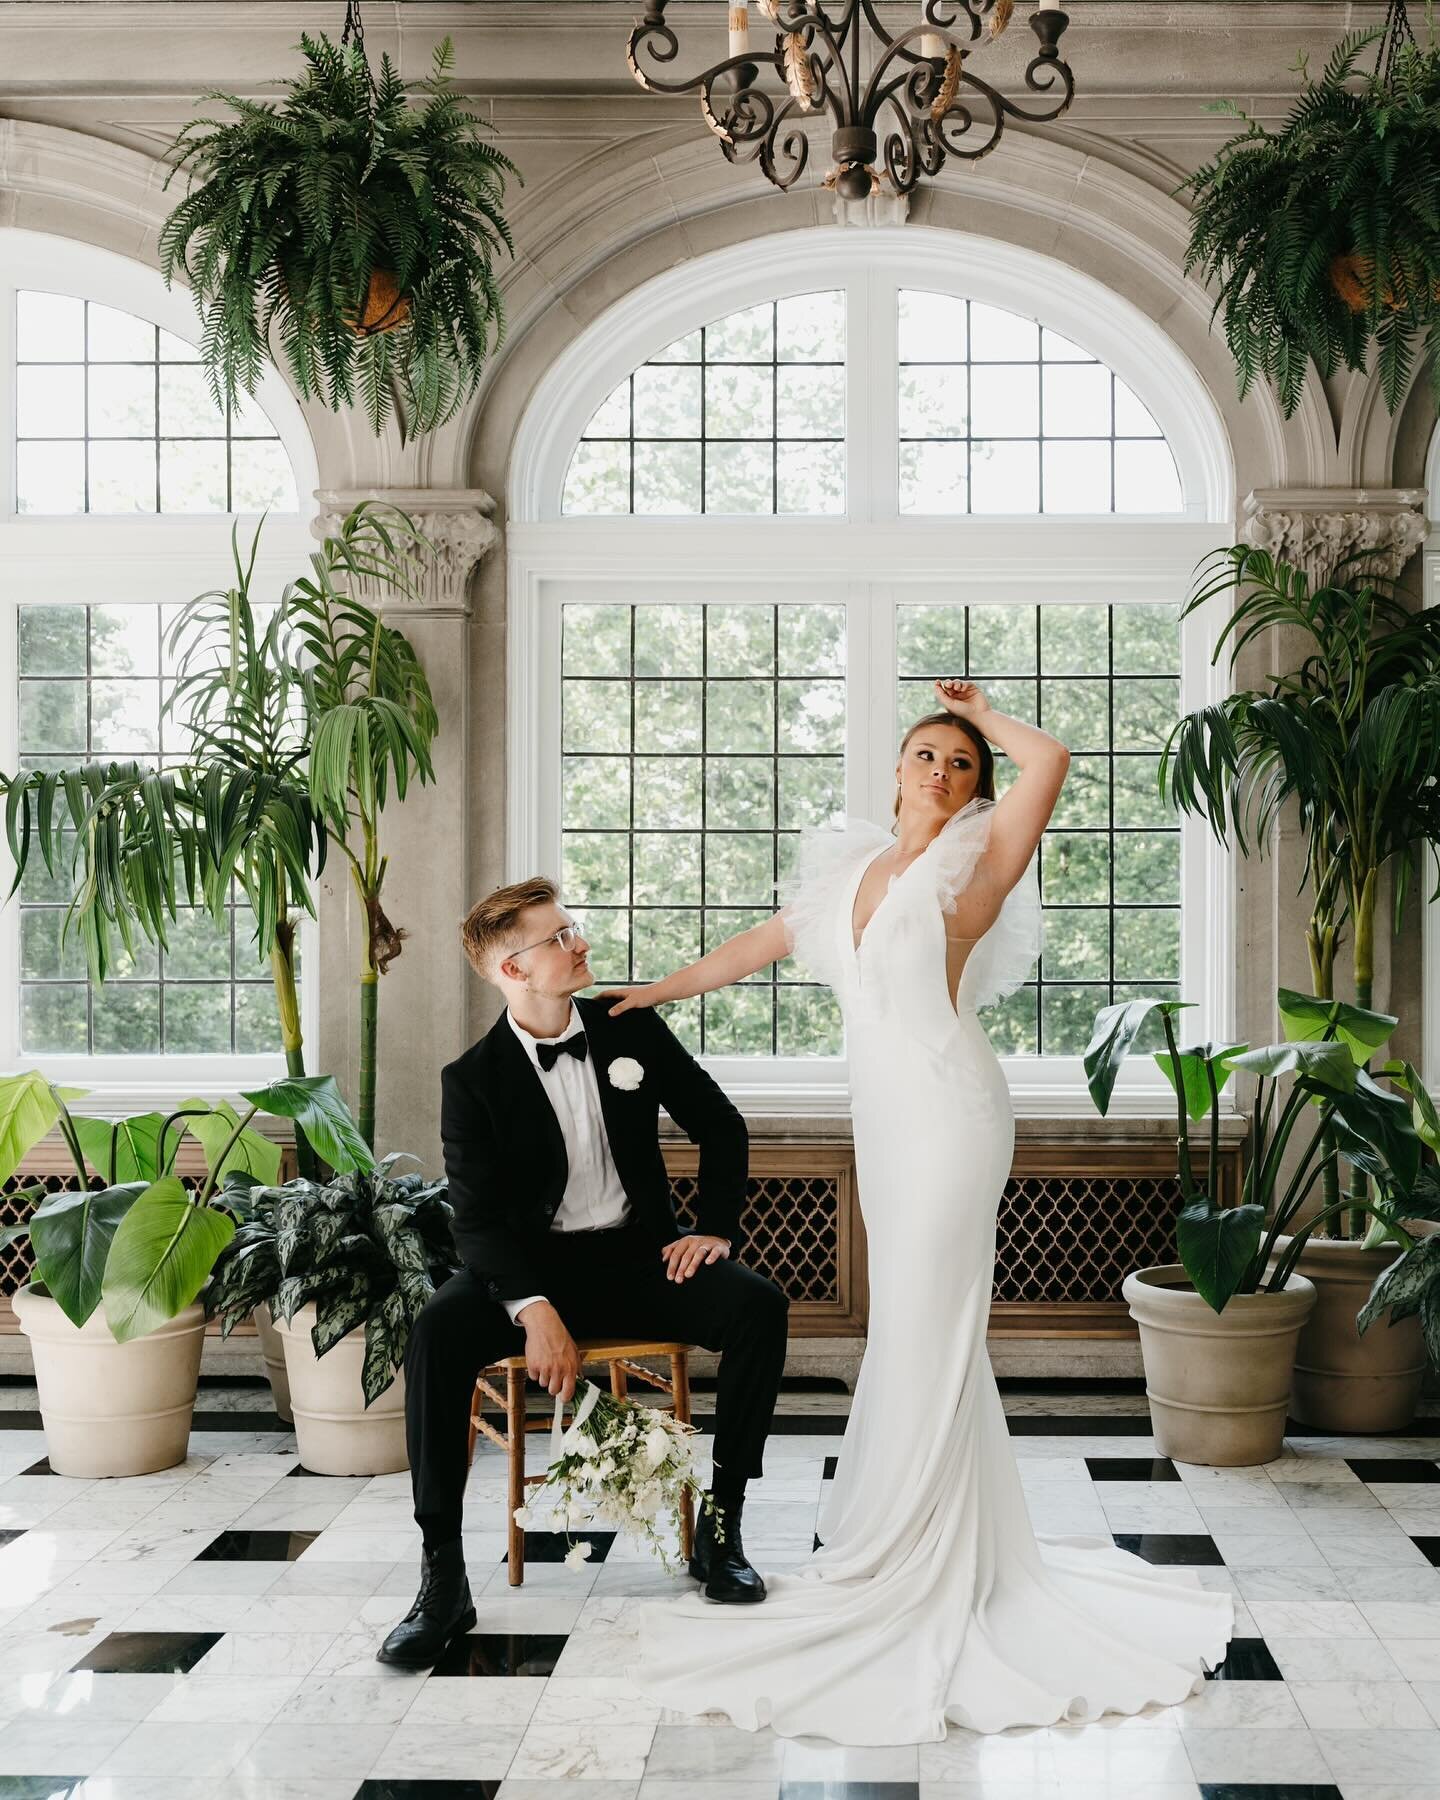 If your wedding day vision is full of black &amp; white with lots of greenery, then I&rsquo;m the photographer for you 👏🏼😍 Absolutely obsessed with this chic &amp; classy look!

Host: @theroamcollectiveco 
Venue: @laurelhallindy 
Couple: @annie.c.